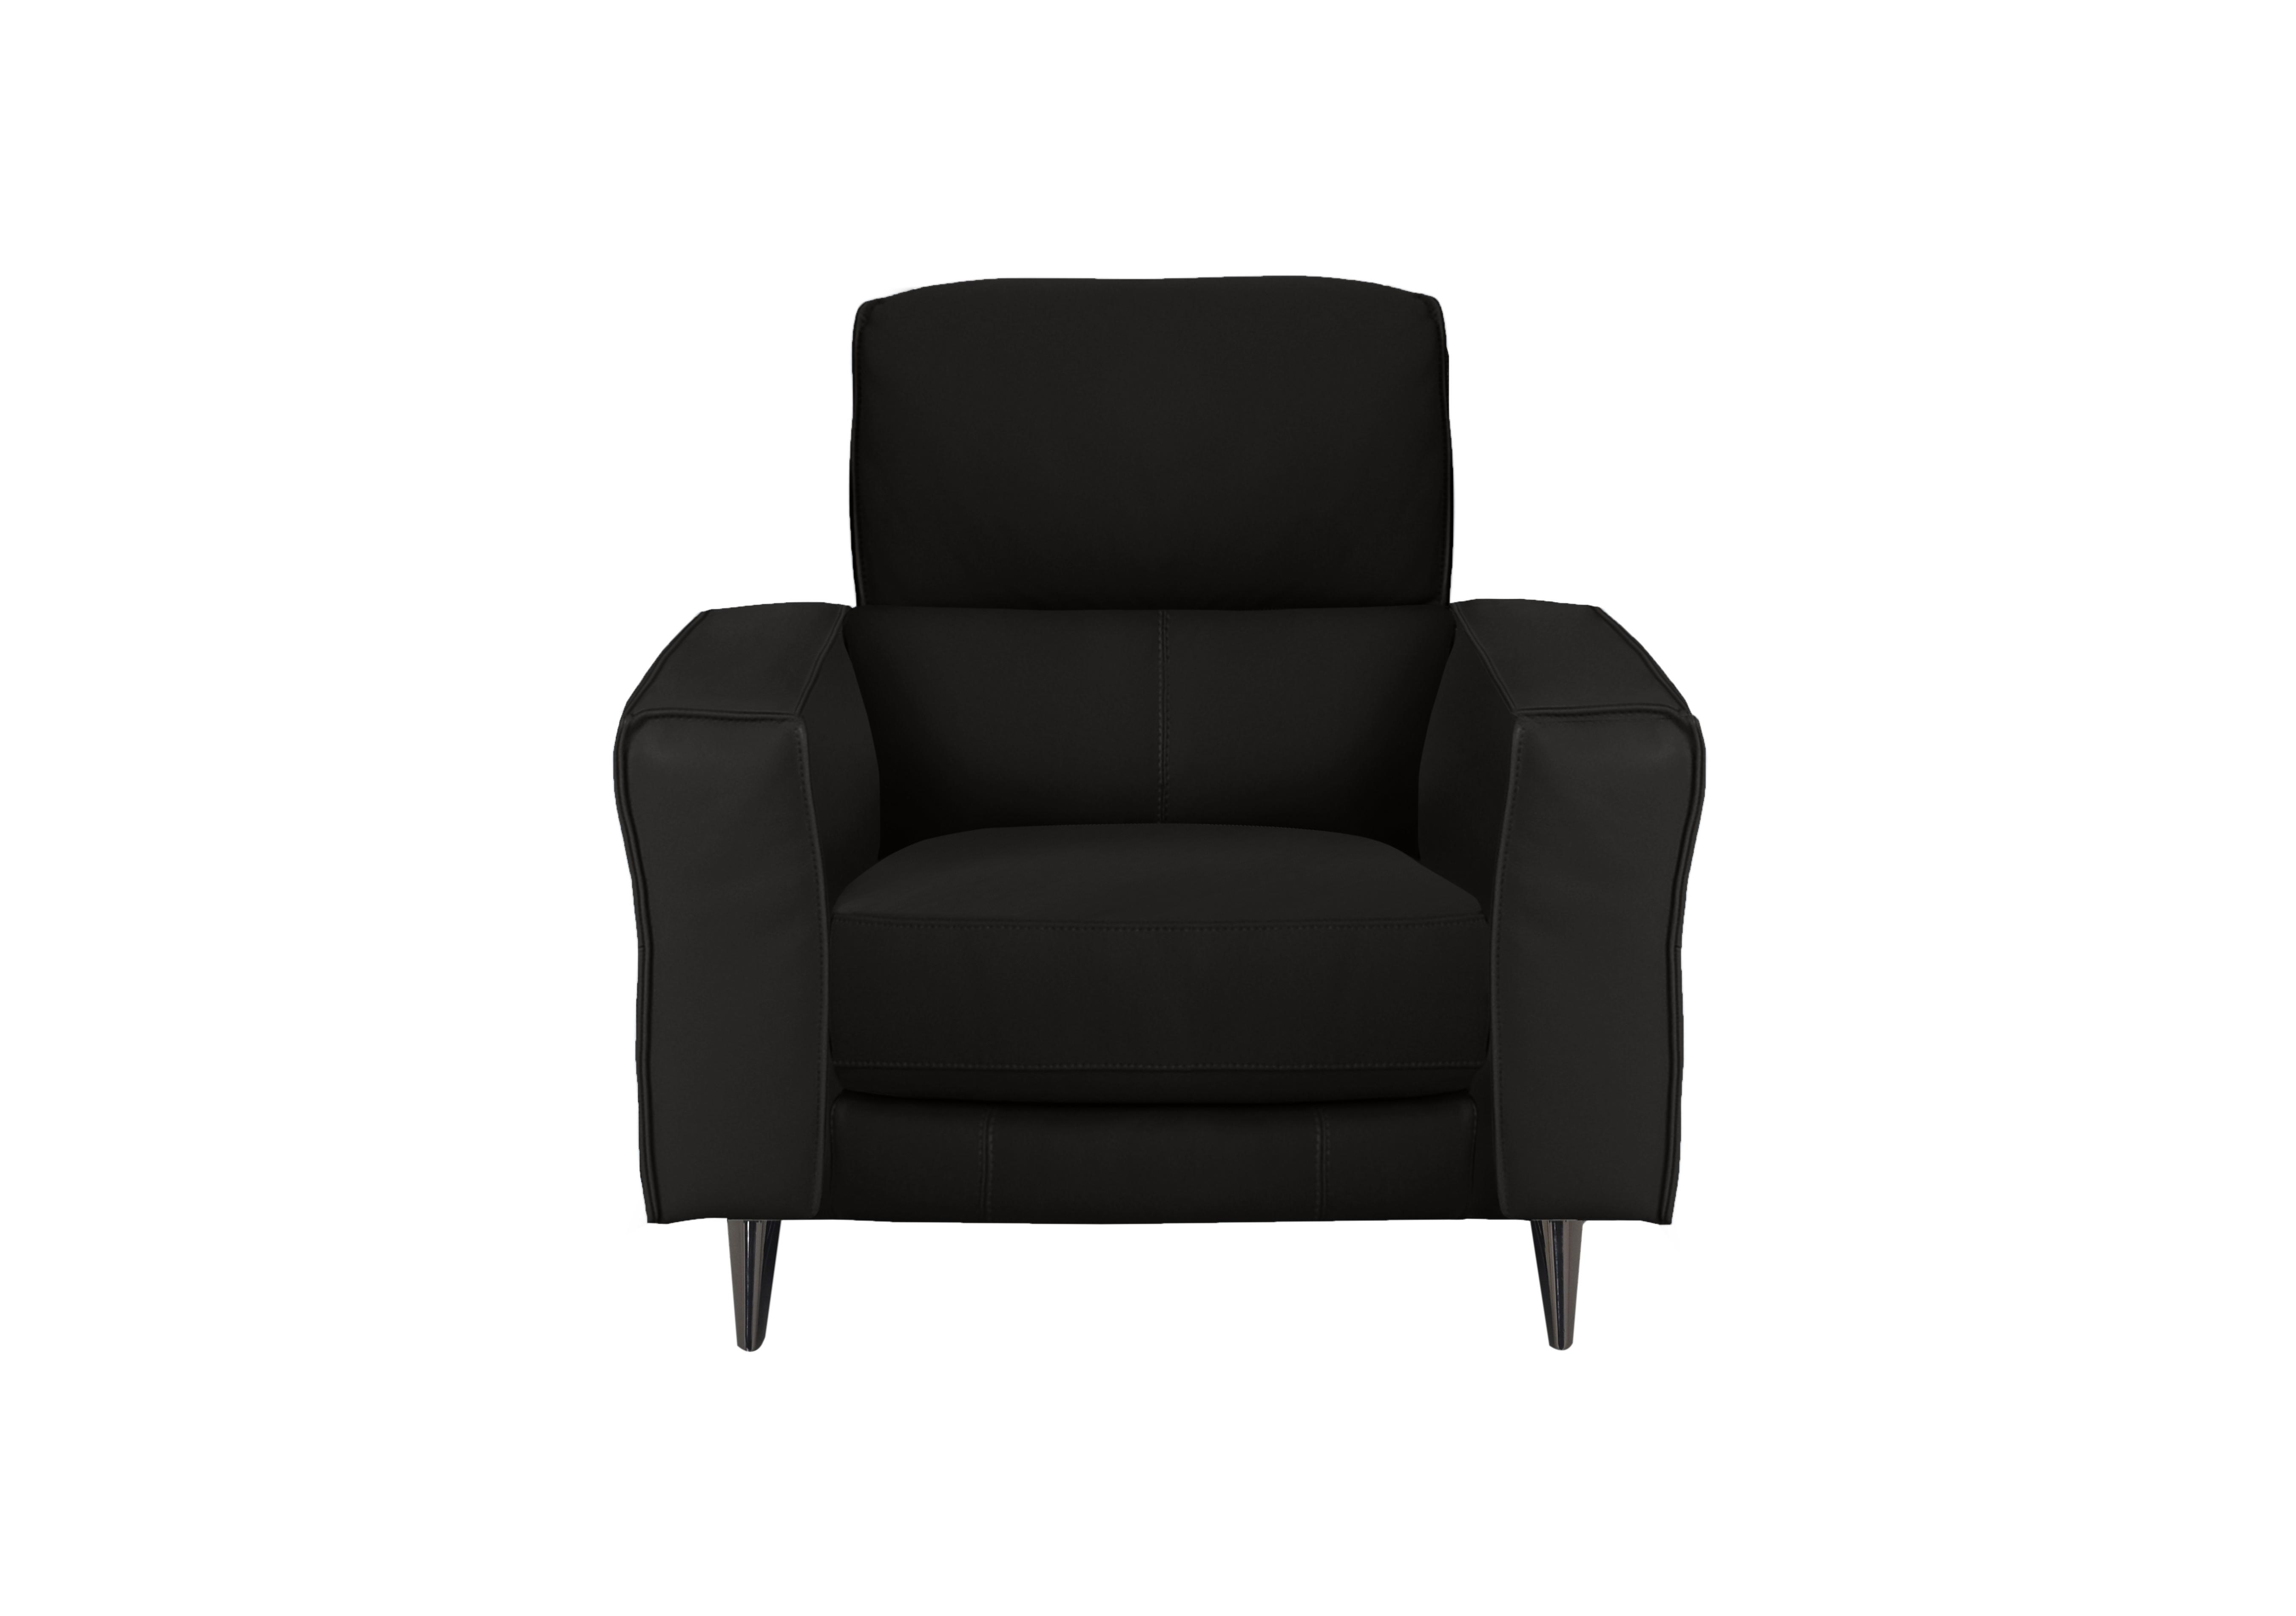 Axel Leather Armchair in Bv-3500 Classic Black on Furniture Village